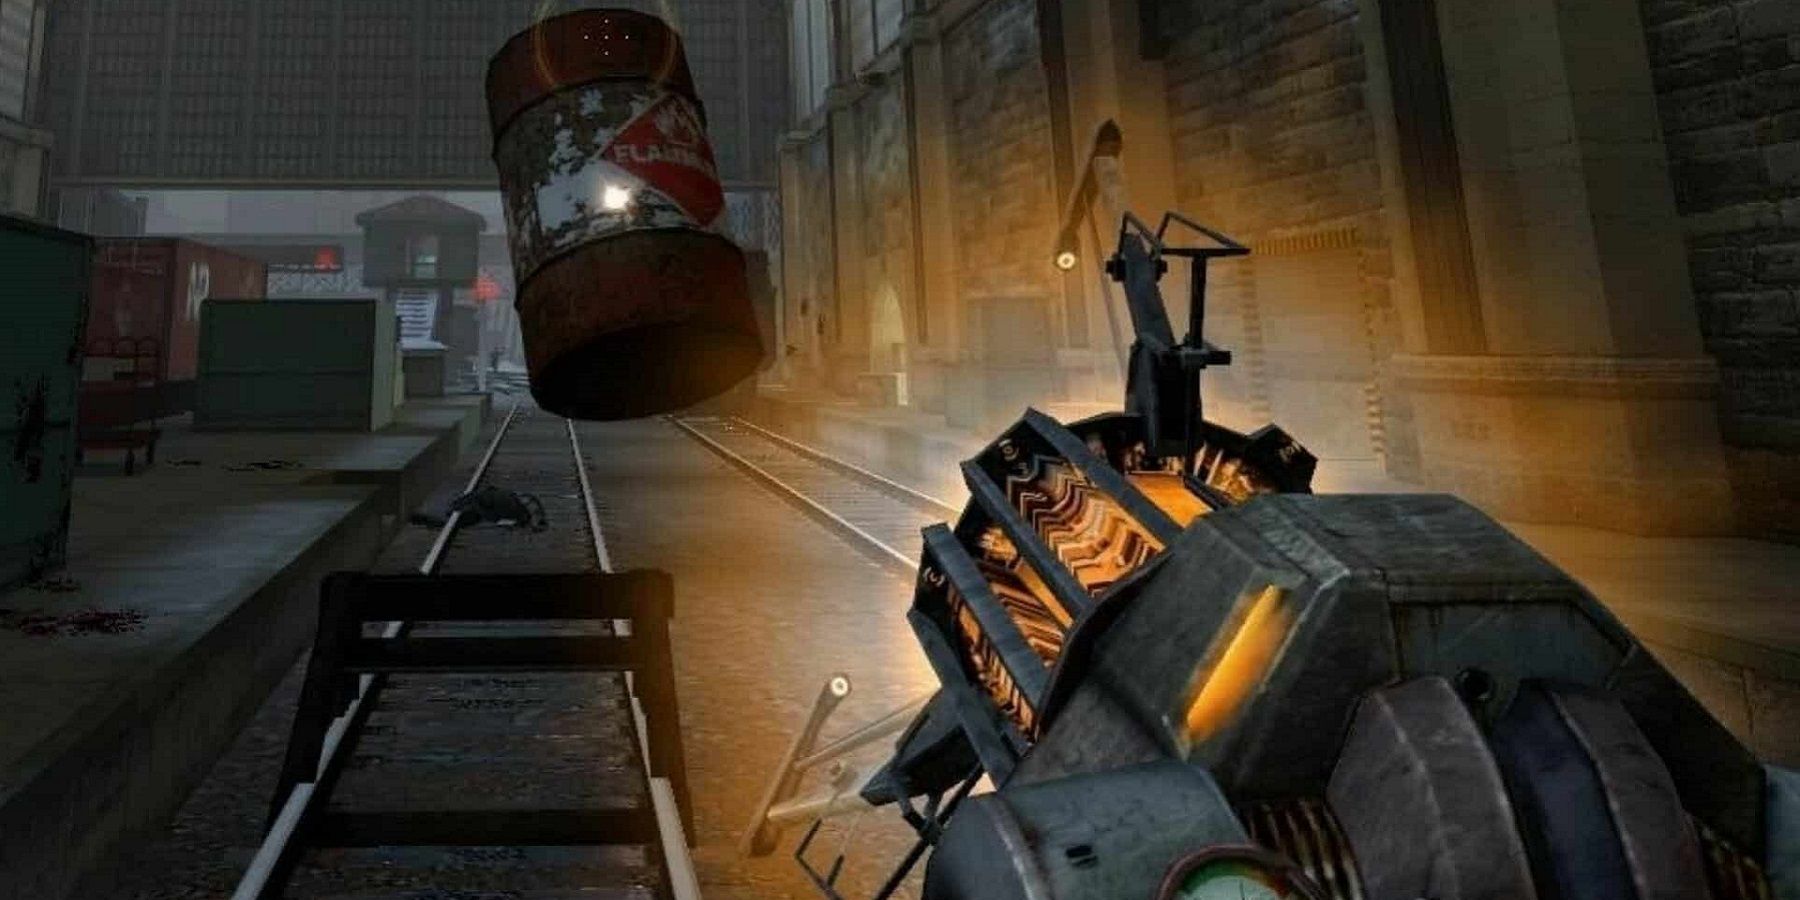 Image from Half-Life 2 showing the gravity gun lifting a red barrel.